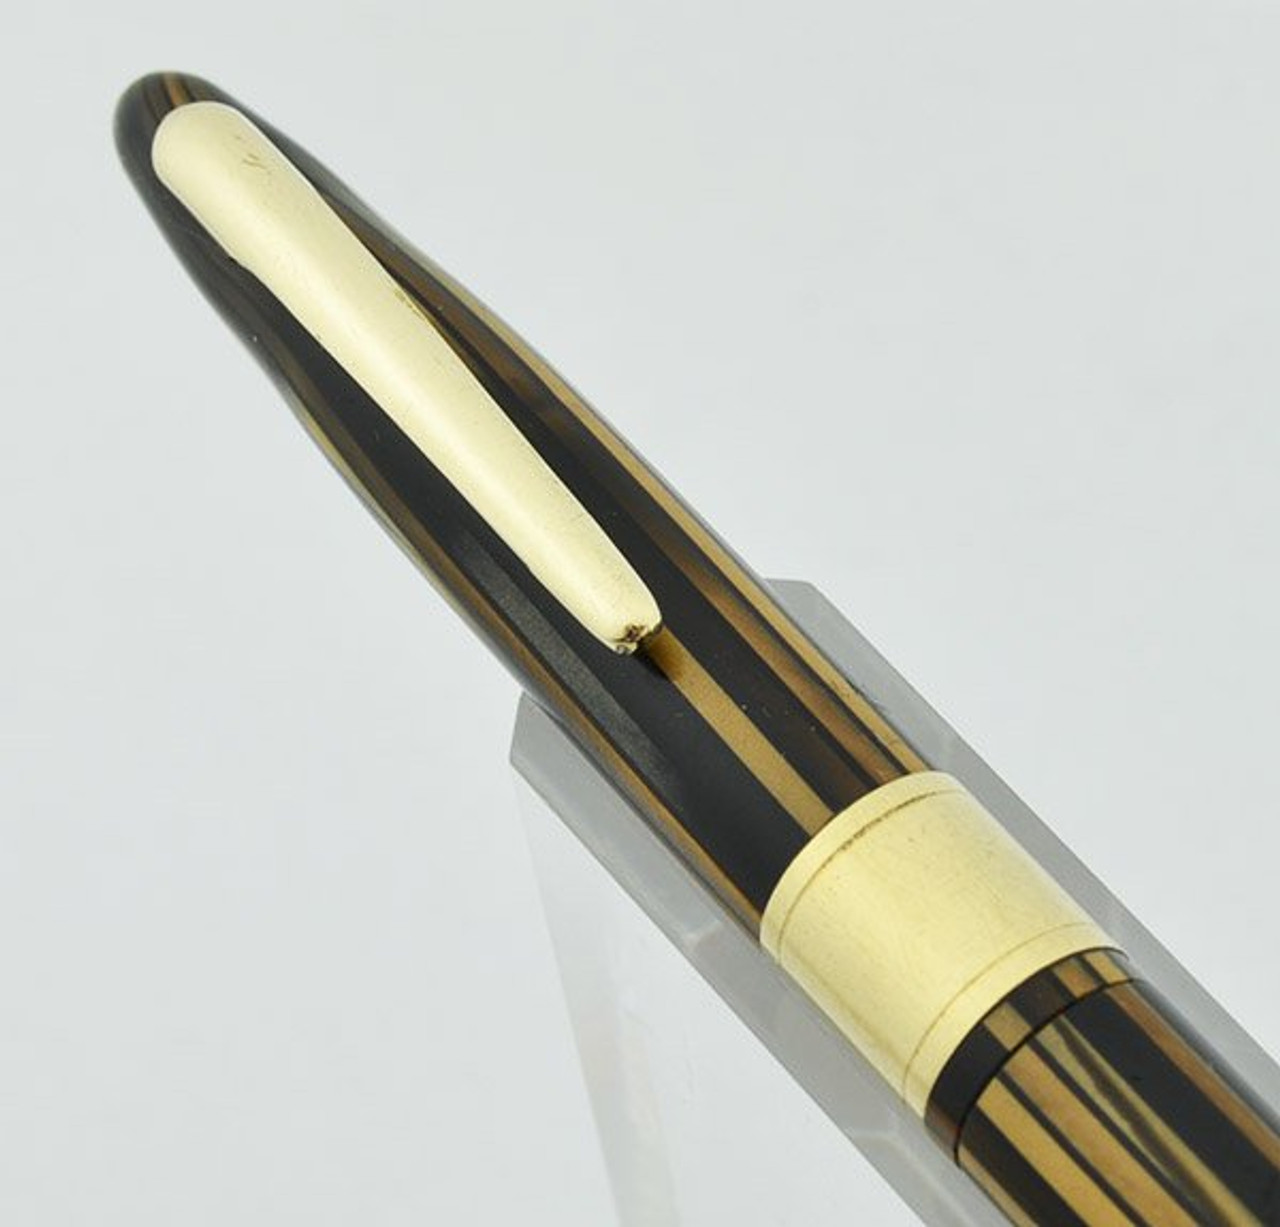 Sheaffer Crest 500 Mechanical Pencil - Golden Brown Striated, 3/8" Band (Excellent, Works Well)